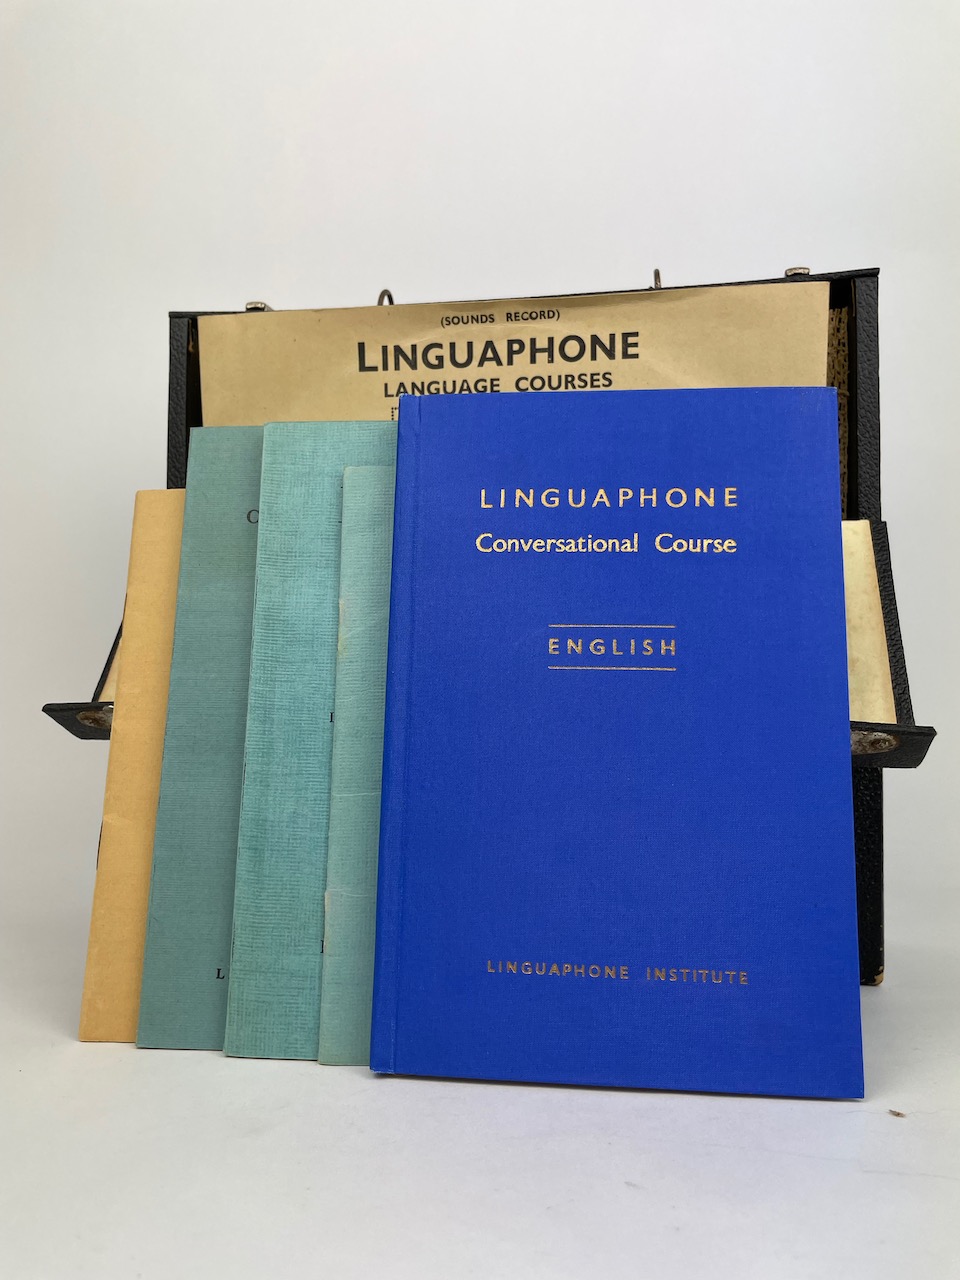 Linguaphone Conversational Course English - Complete set - 16 records and 5 booklets in original box 7